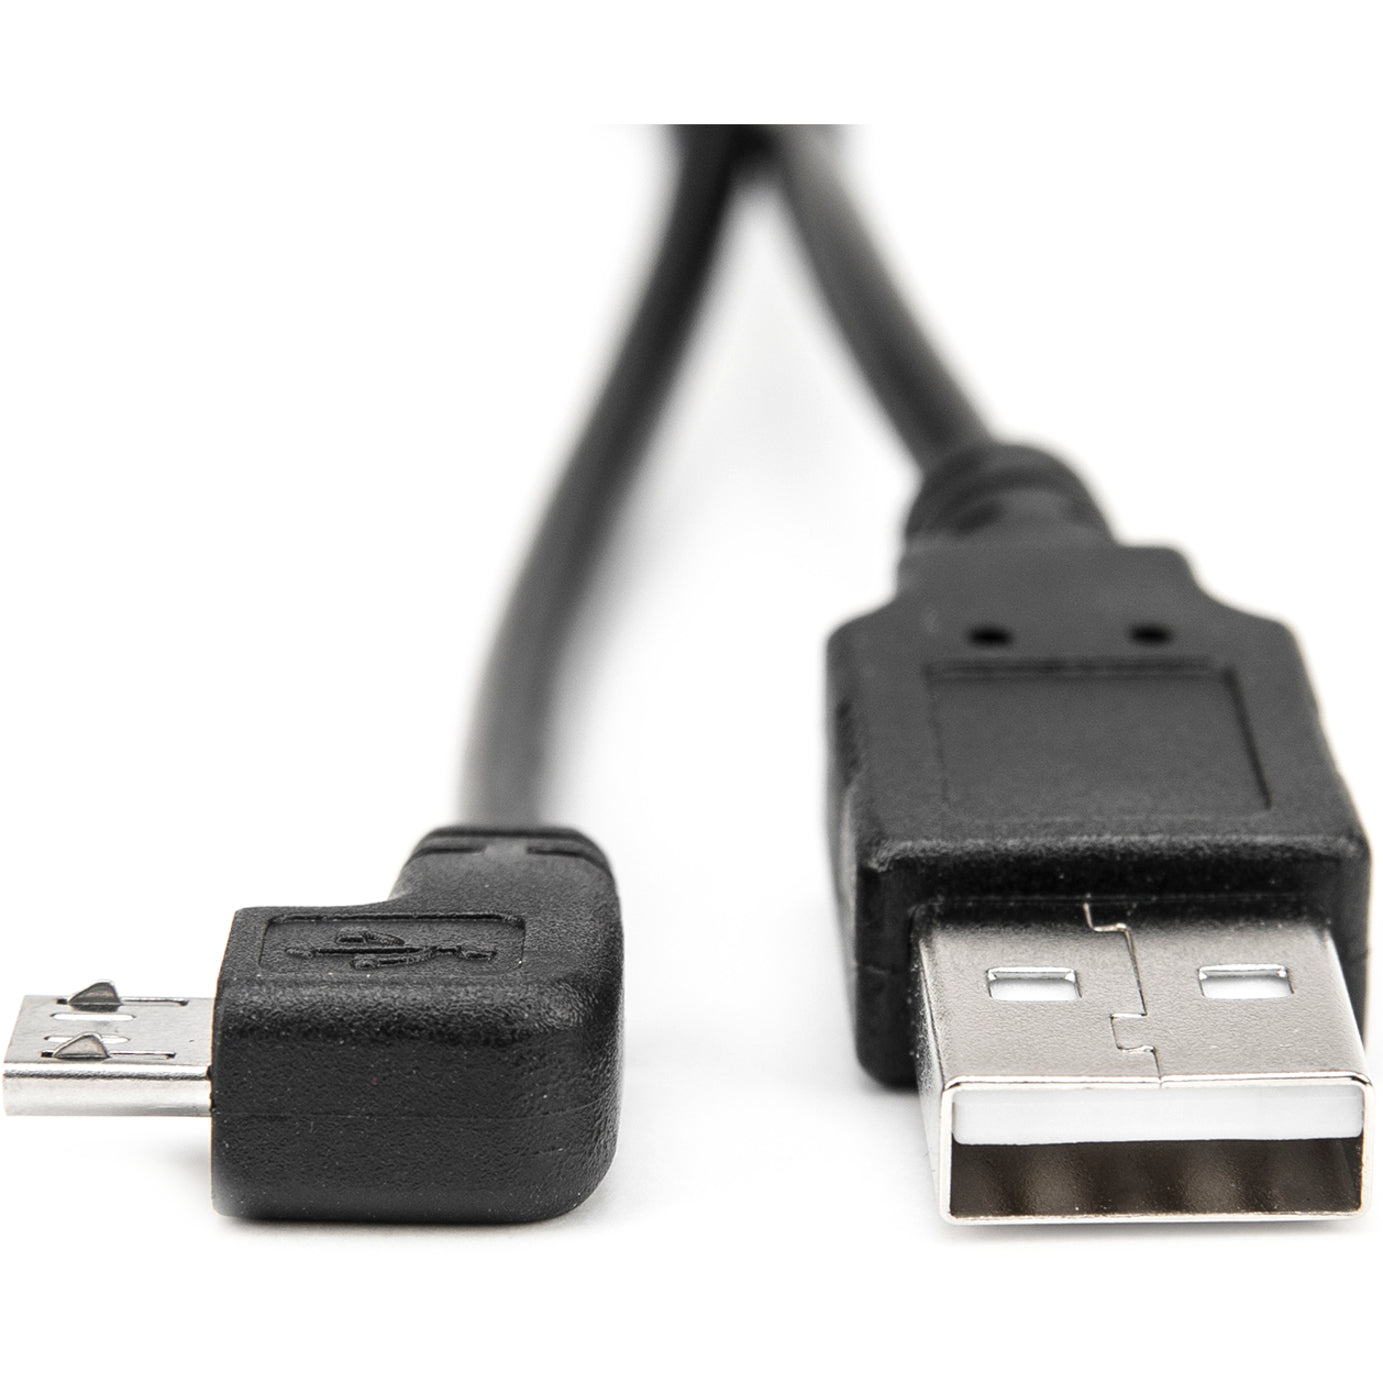 Rocstor Y10C222-B1 Premium USB Cable, 3ft, Right-angled Connector, Charging, Black